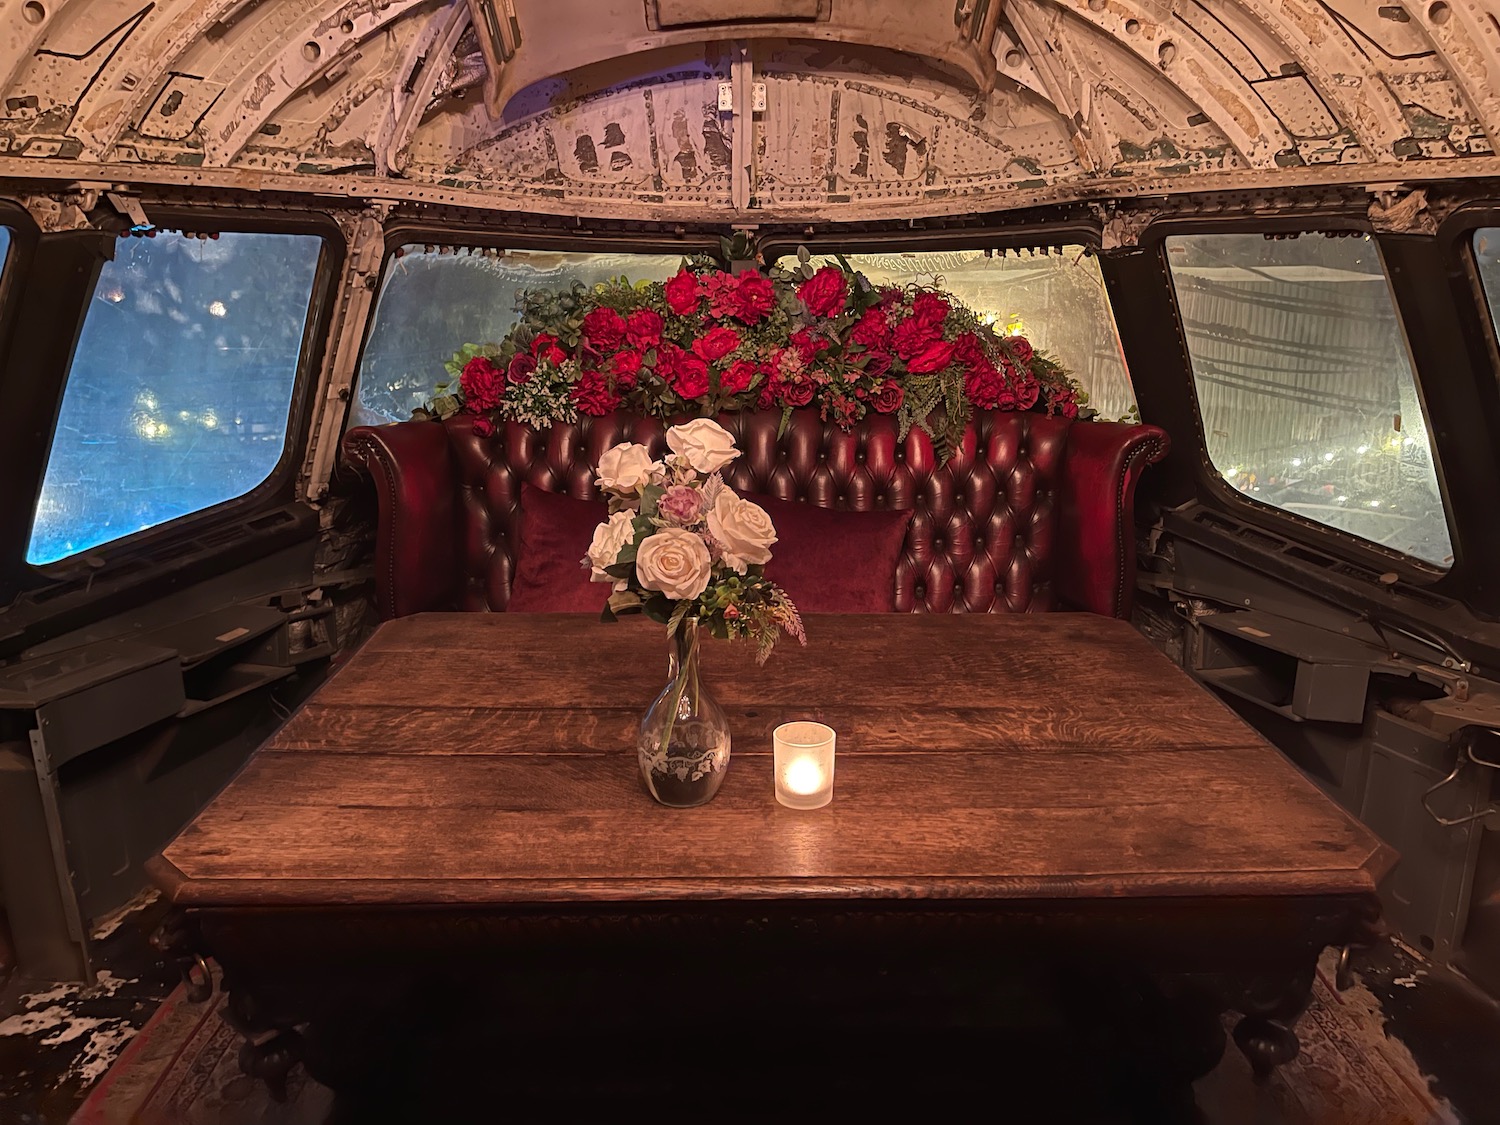 a table with flowers and candles in the cockpit of an airplane